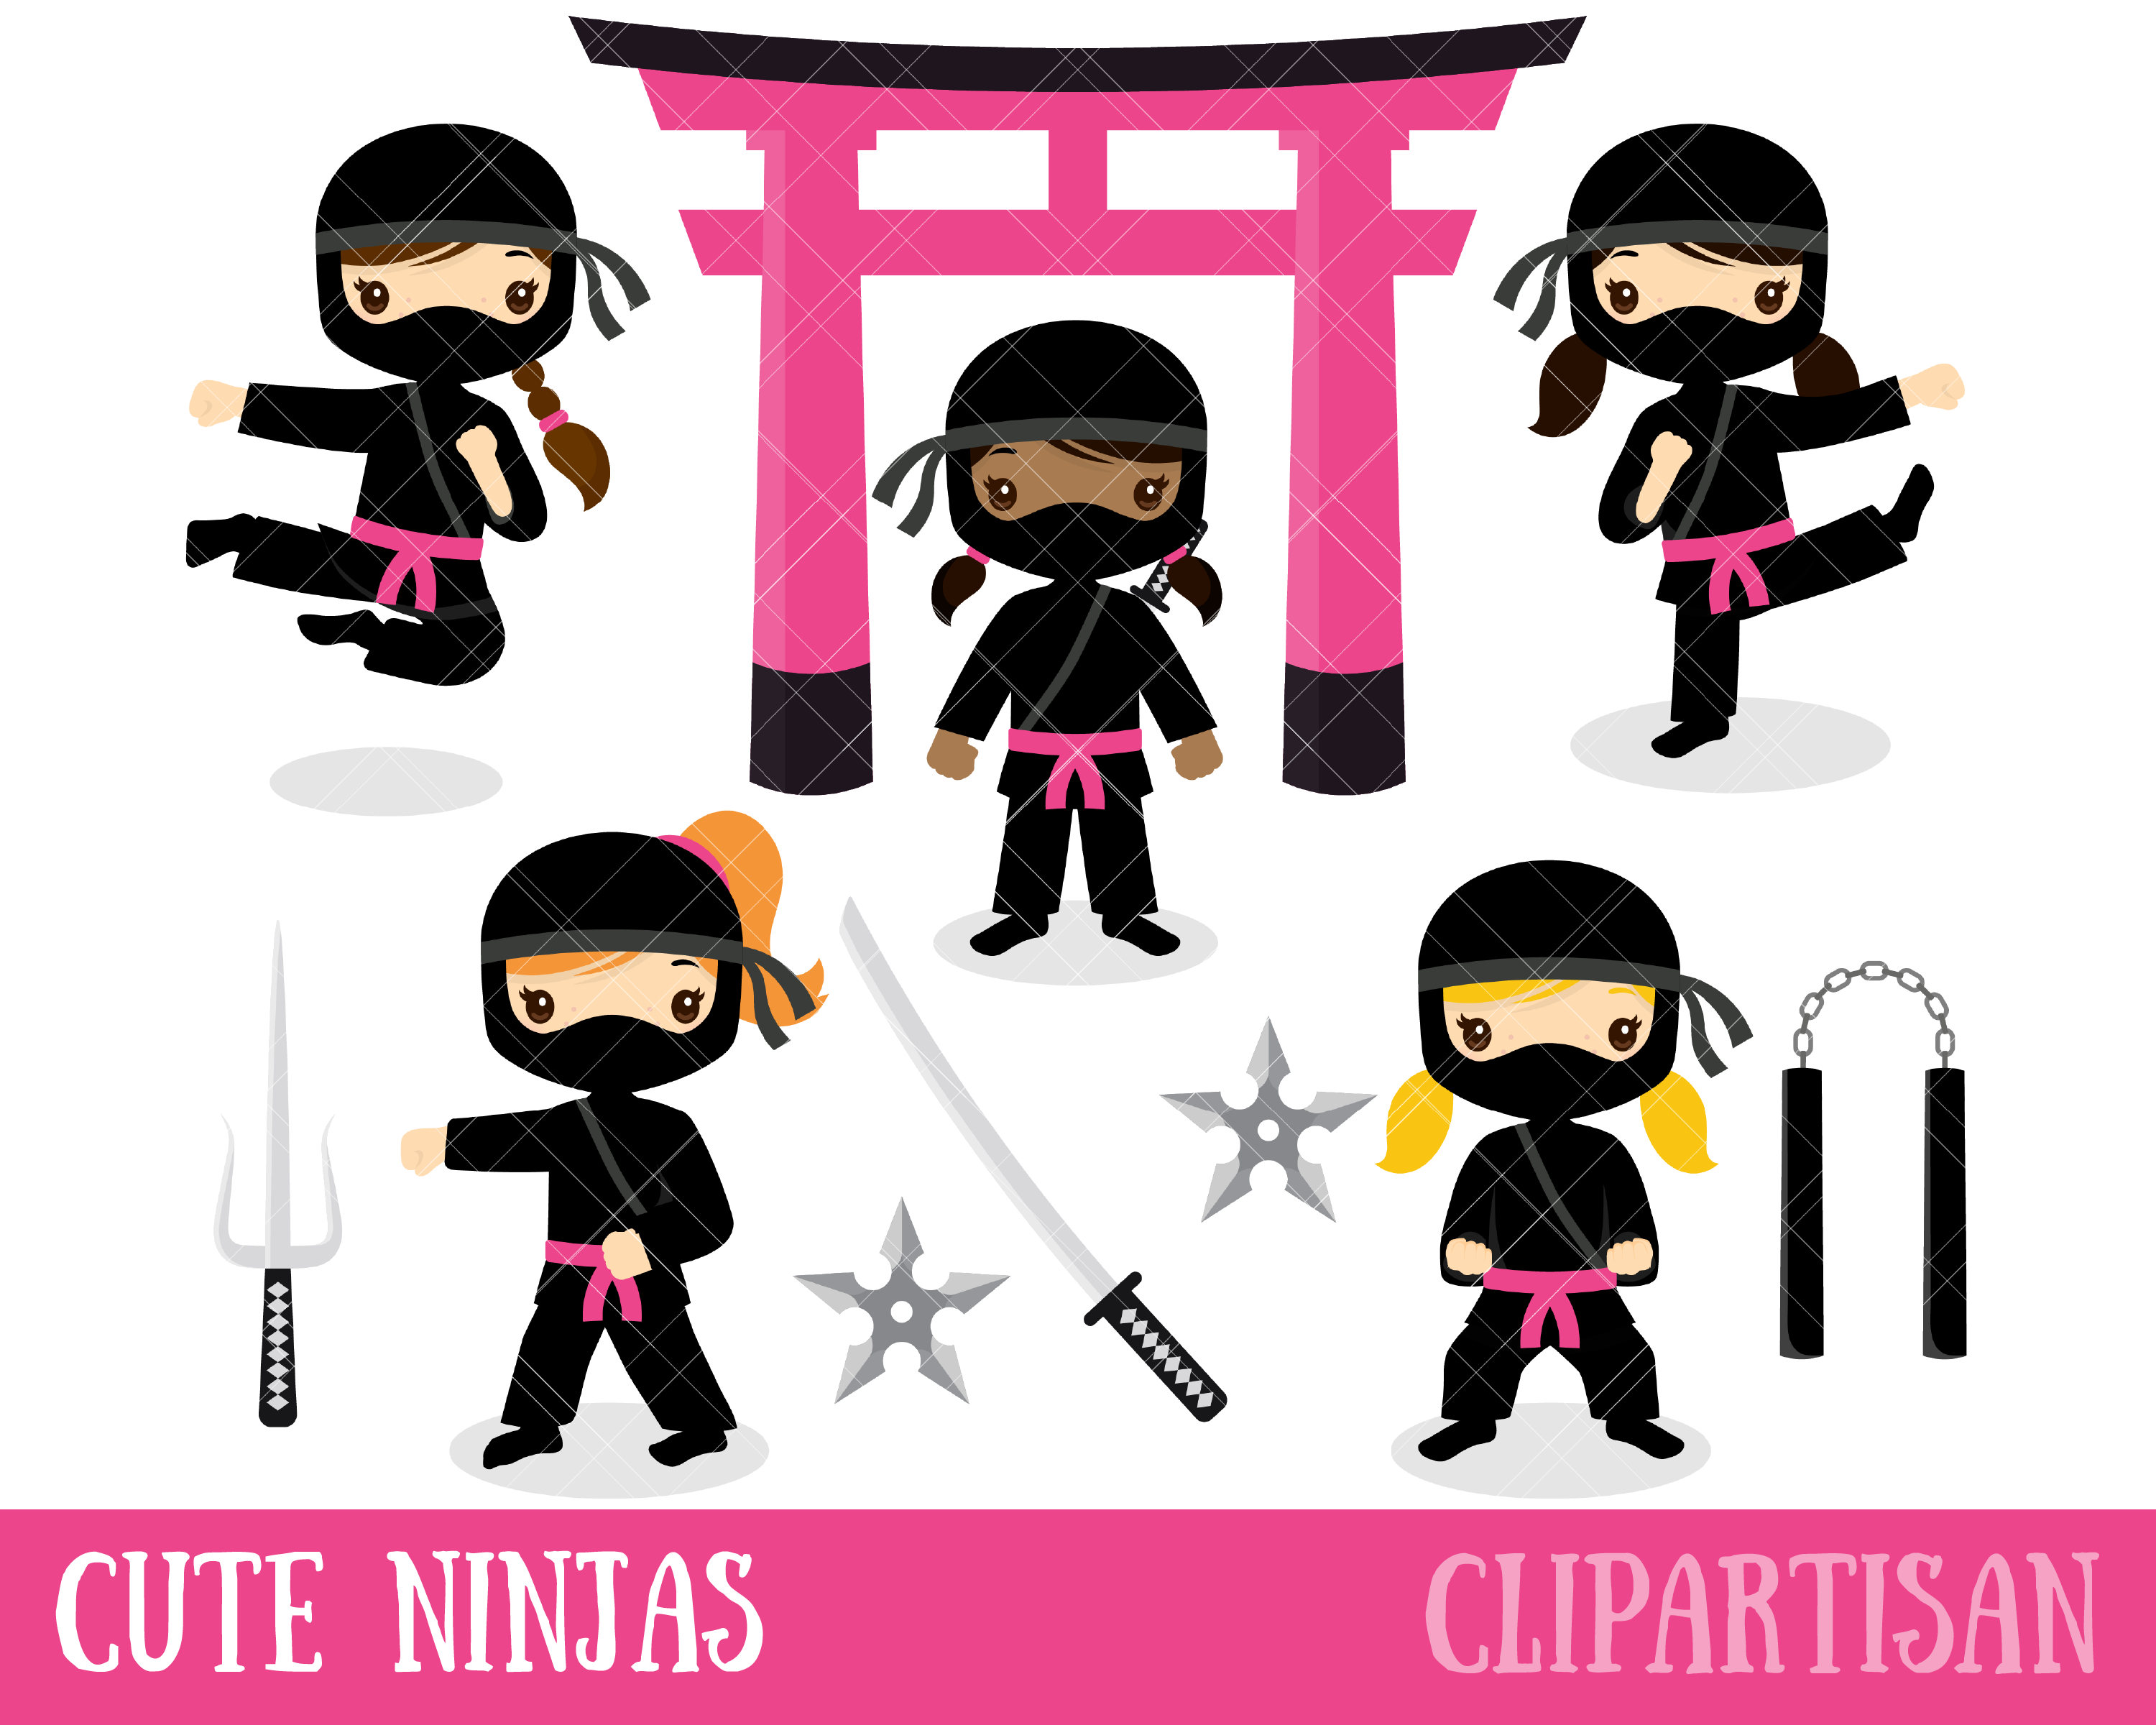 Ninja with Blue and Pink Hair Art - wide 5